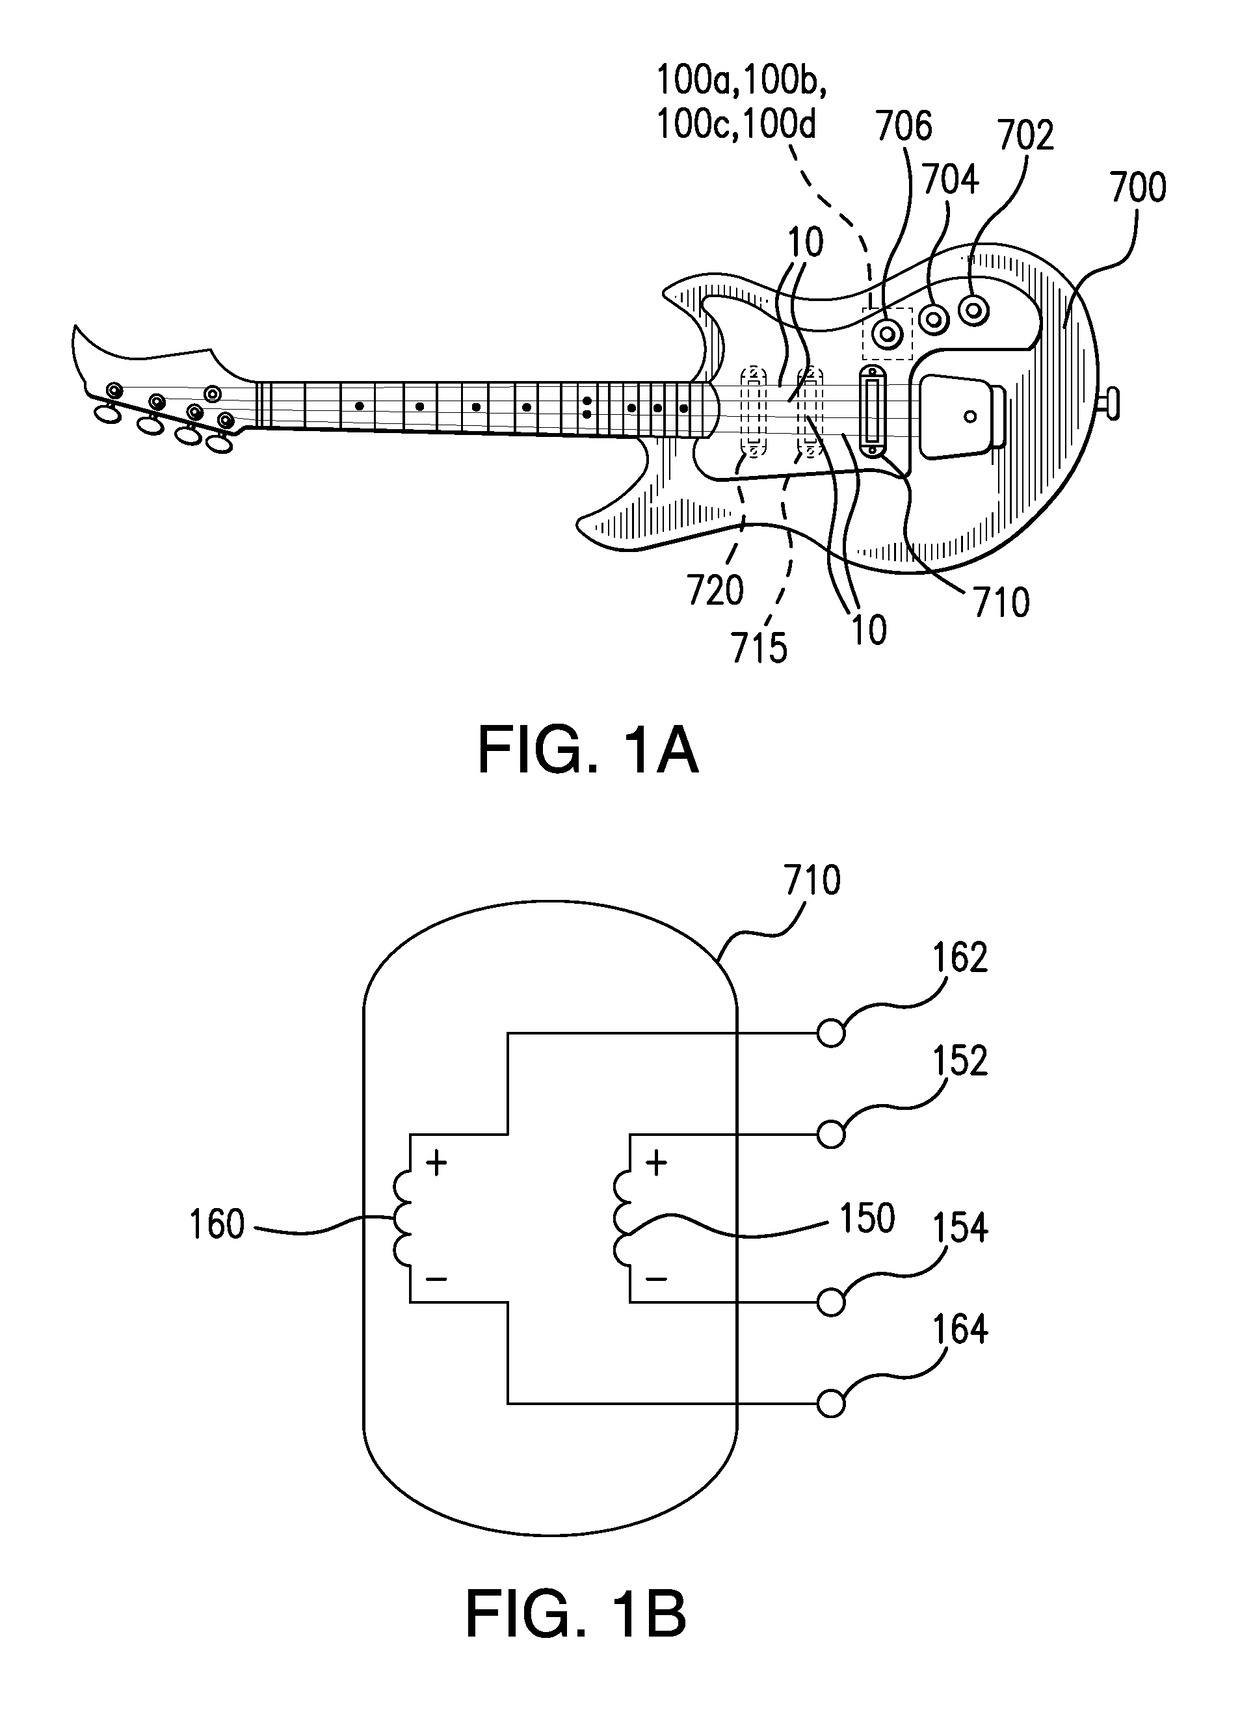 Switched reversing configuration control for string instruments and boost circuit therefor